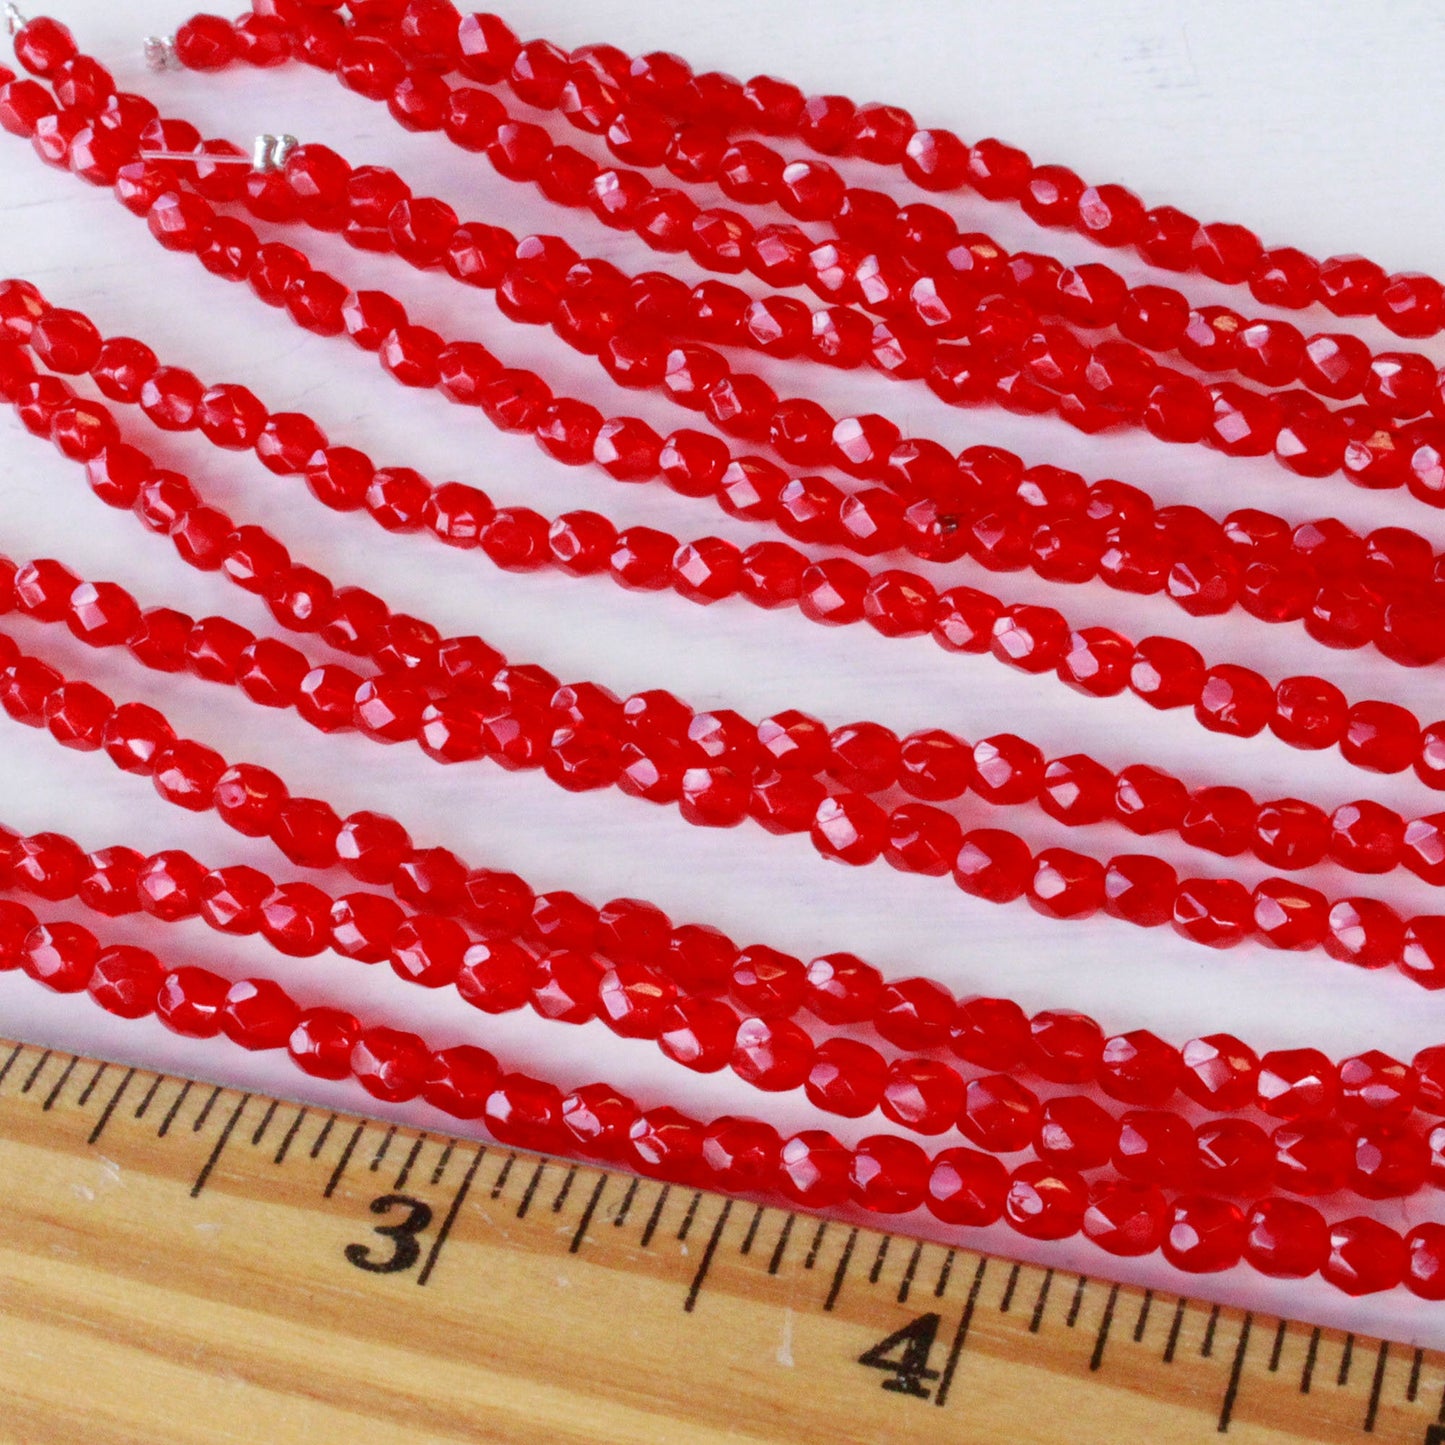 Load image into Gallery viewer, 4mm Round Firepolished Beads - Siam Red - 64 Beads
